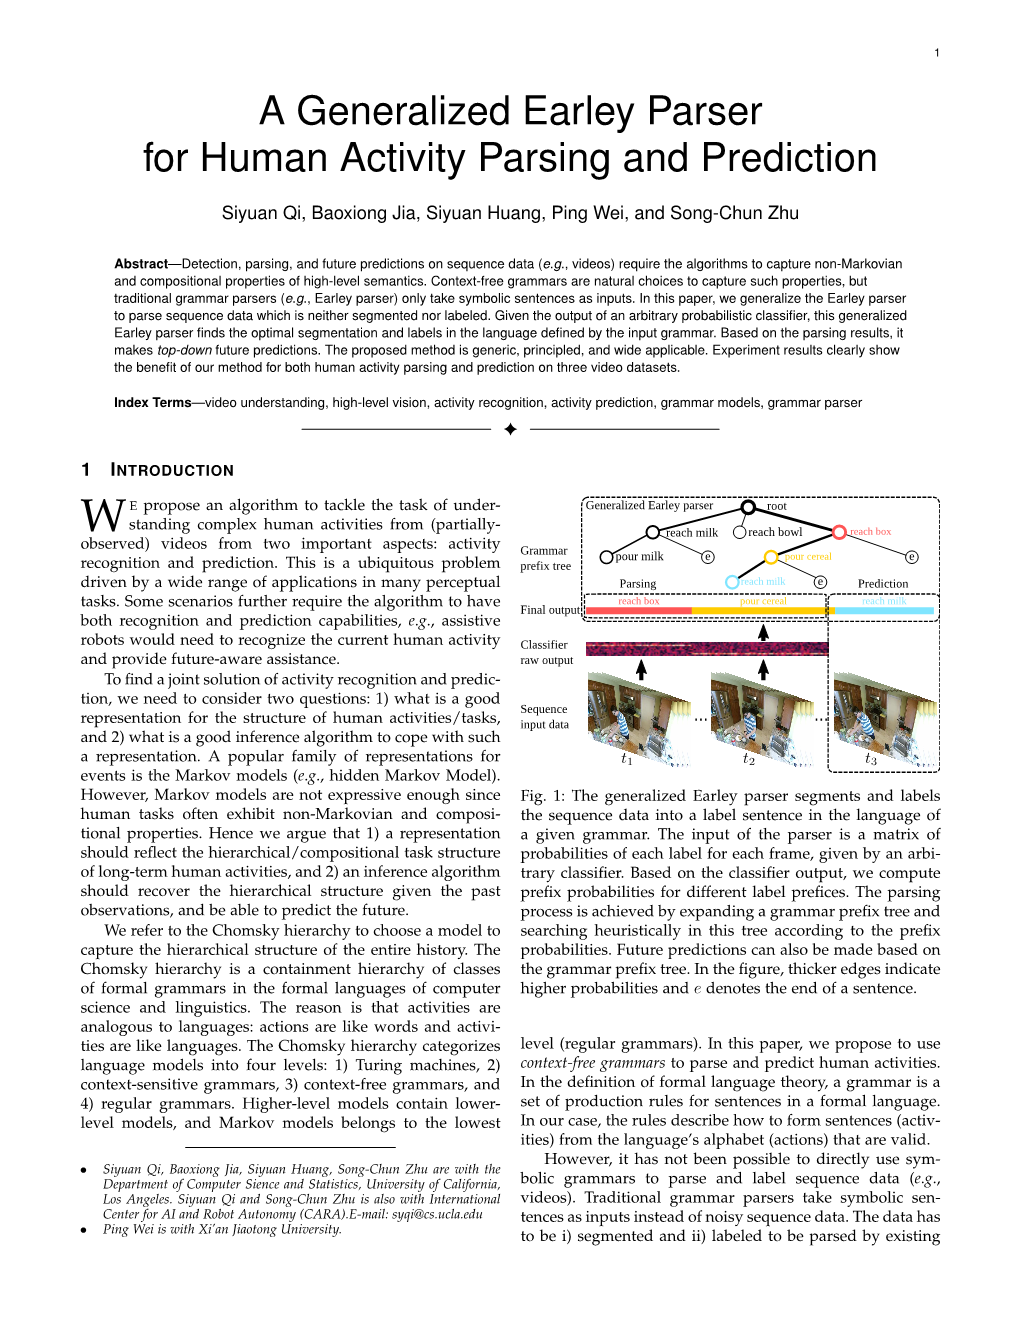 A Generalized Earley Parser for Human Activity Parsing and Prediction